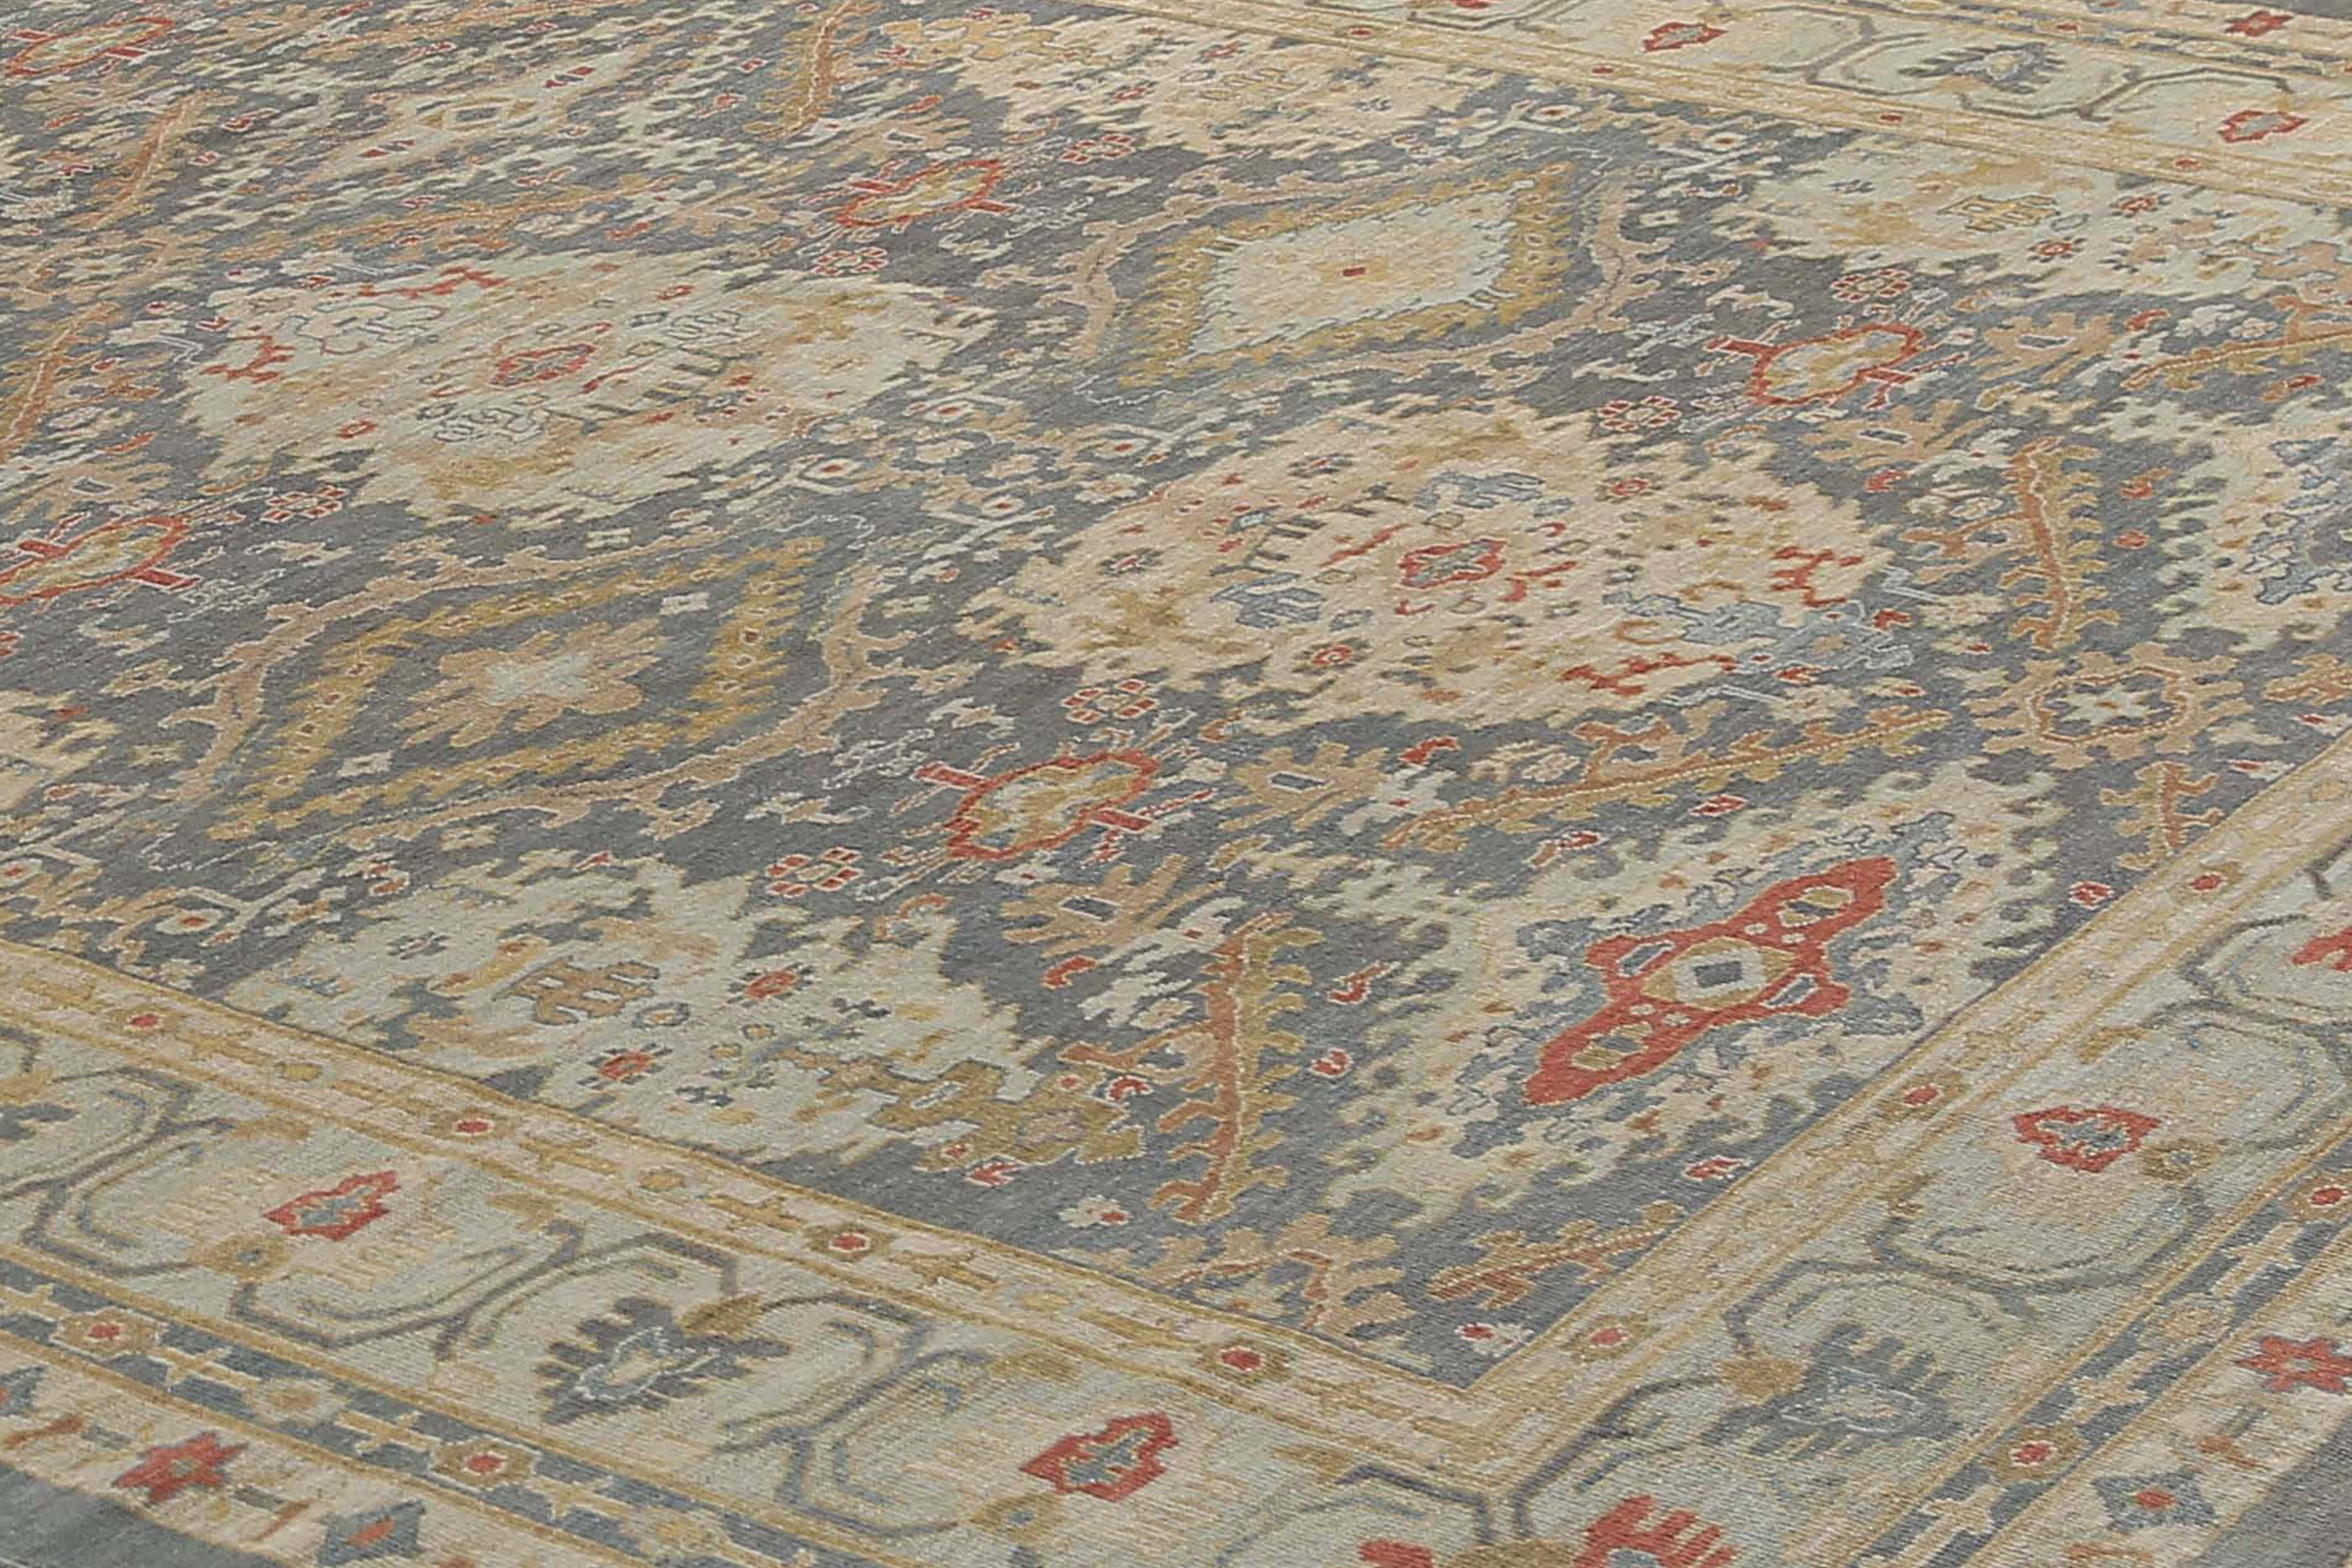 This exquisite Turkish sultanabad rug is a true masterpiece, measuring 12'3'' by 18'6''. Handmade with the utmost care and attention to detail, this rug boasts a stunning color palette of blue, red, and yellow. The intricate design features a